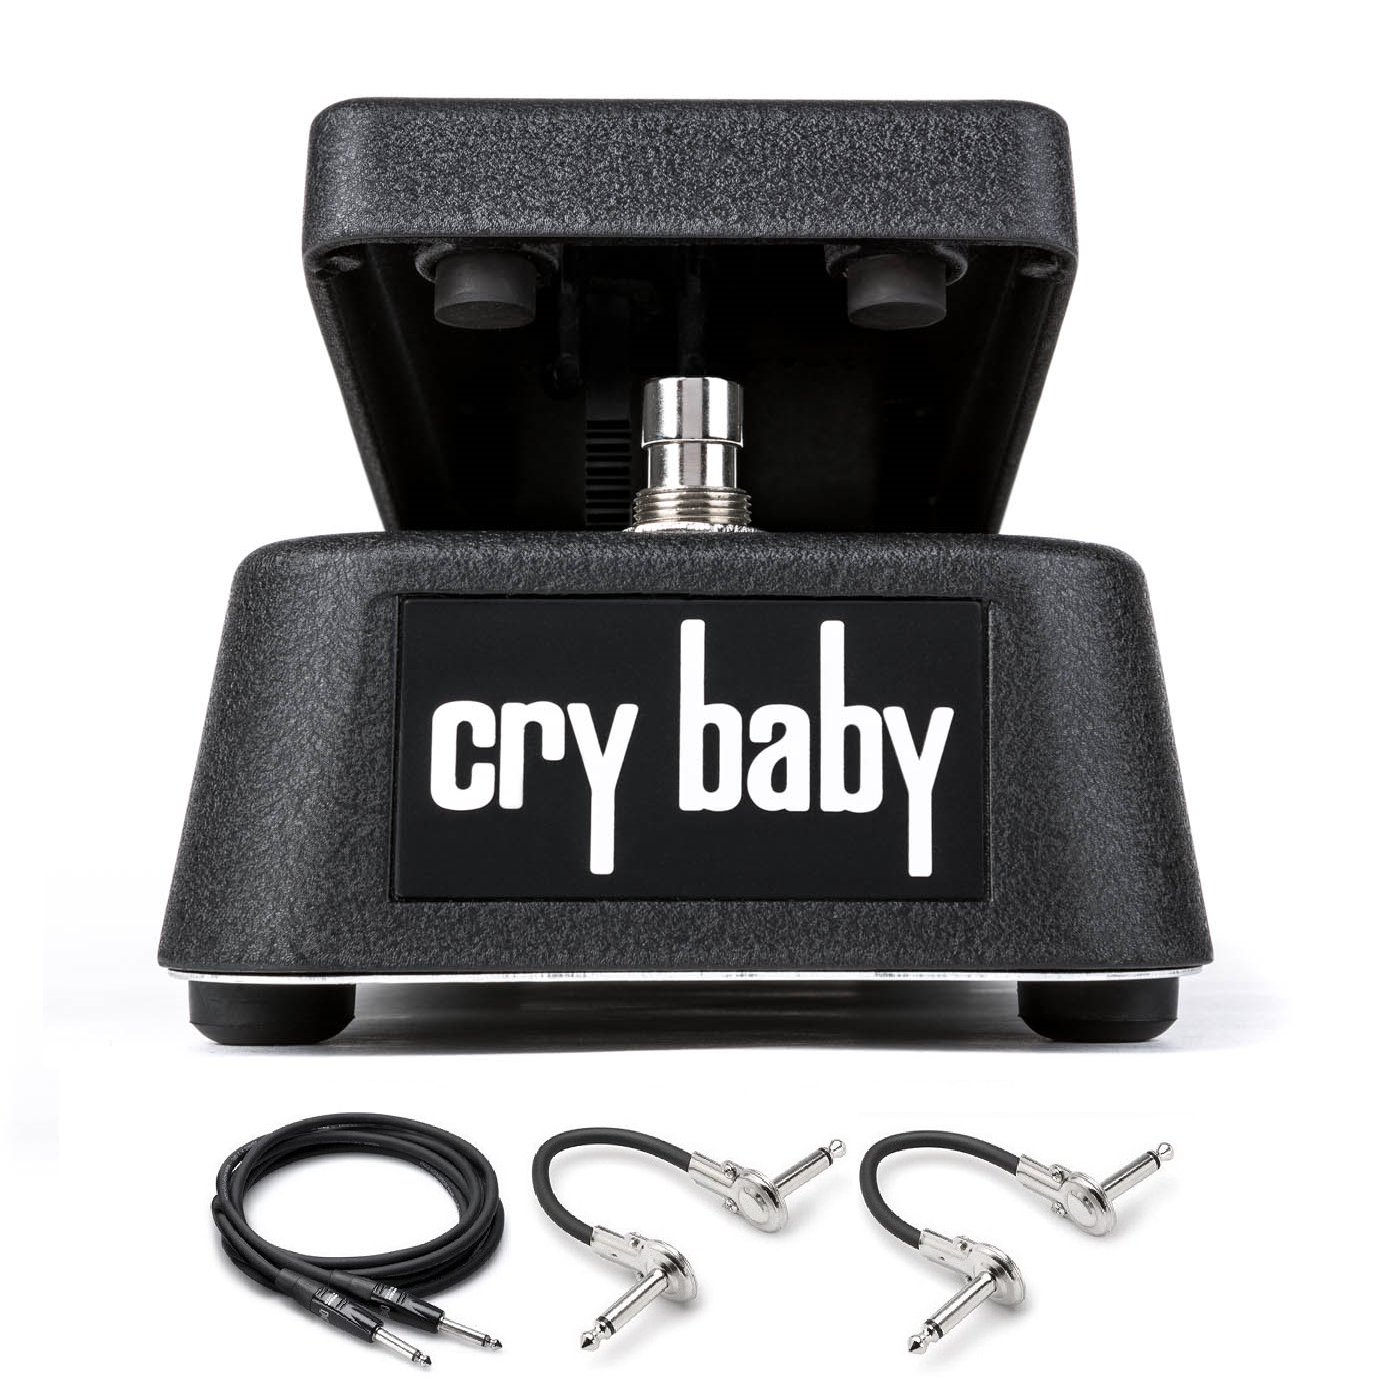 New Dunlop Gcb95 Cry Baby Wah Guitar Effect Pedal W/free Hosa Cables